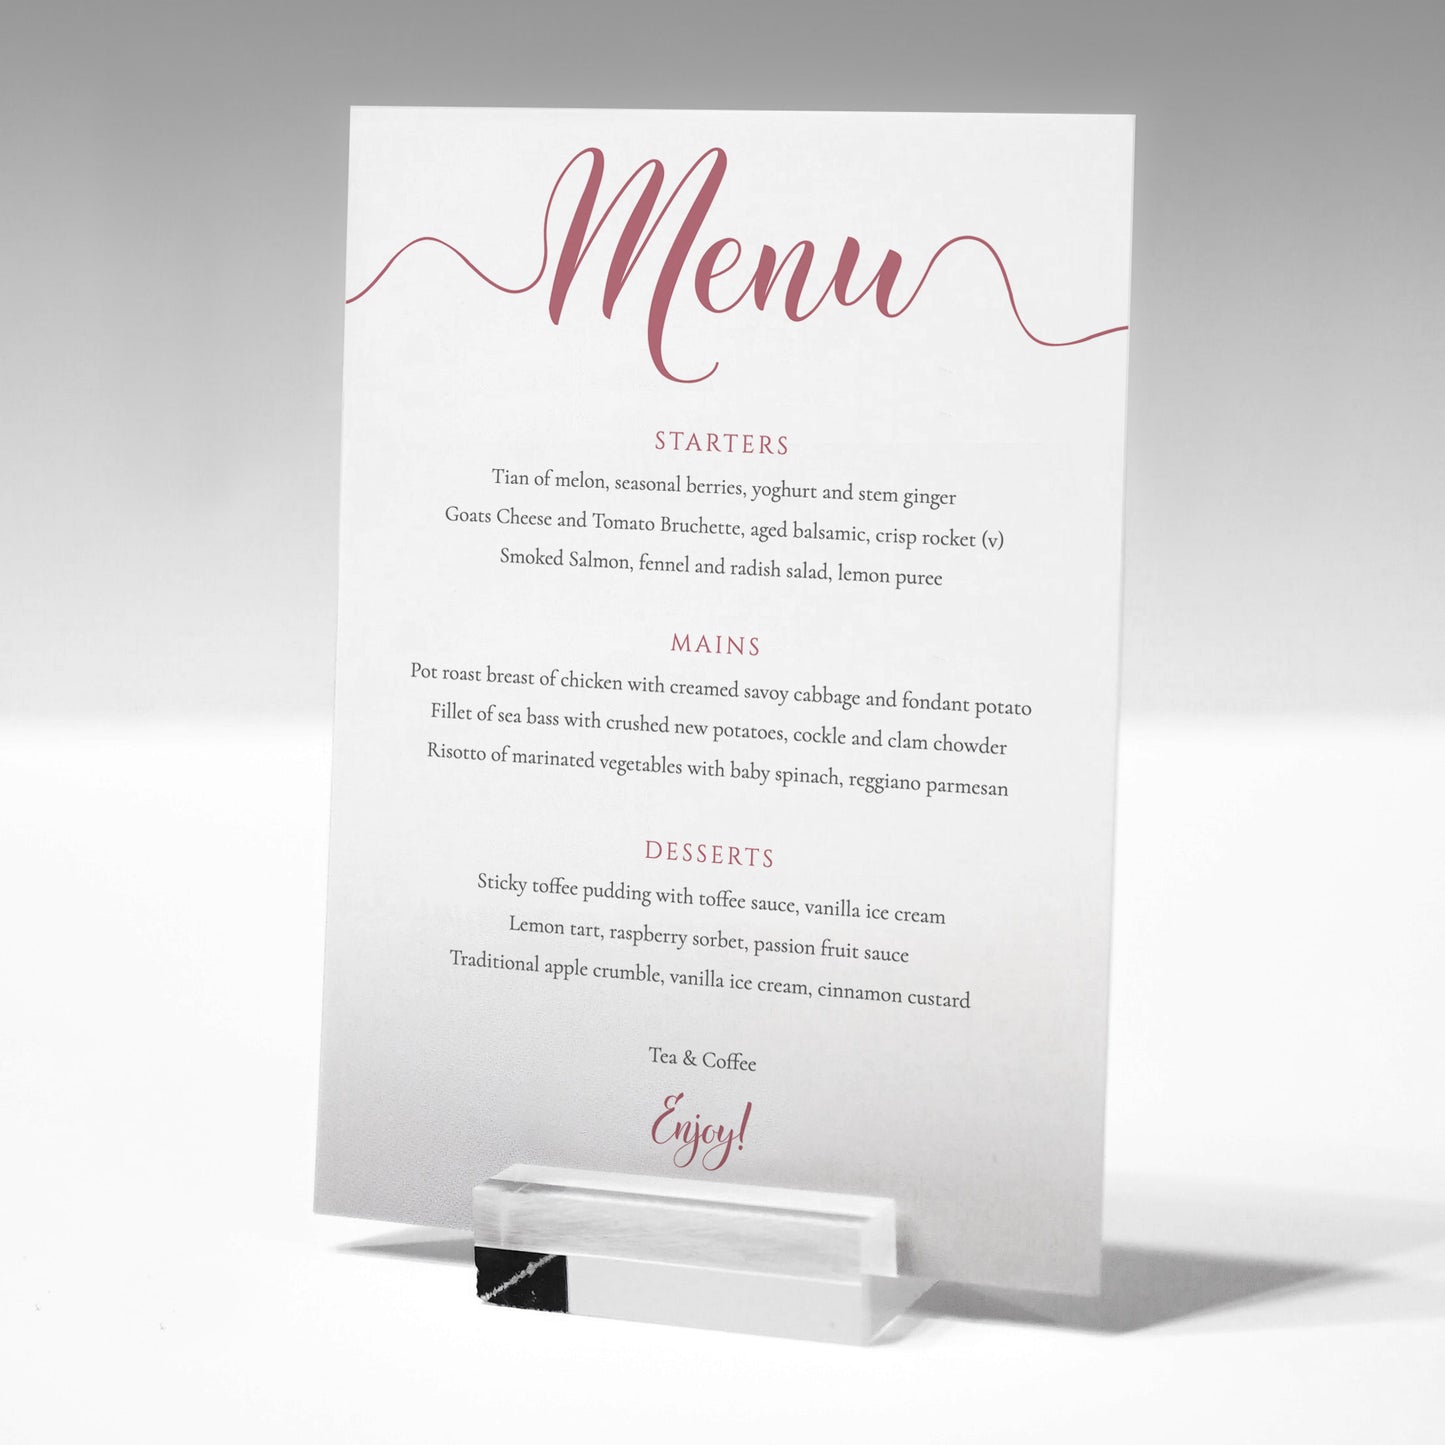 rouge wedding menu card in a glass stand